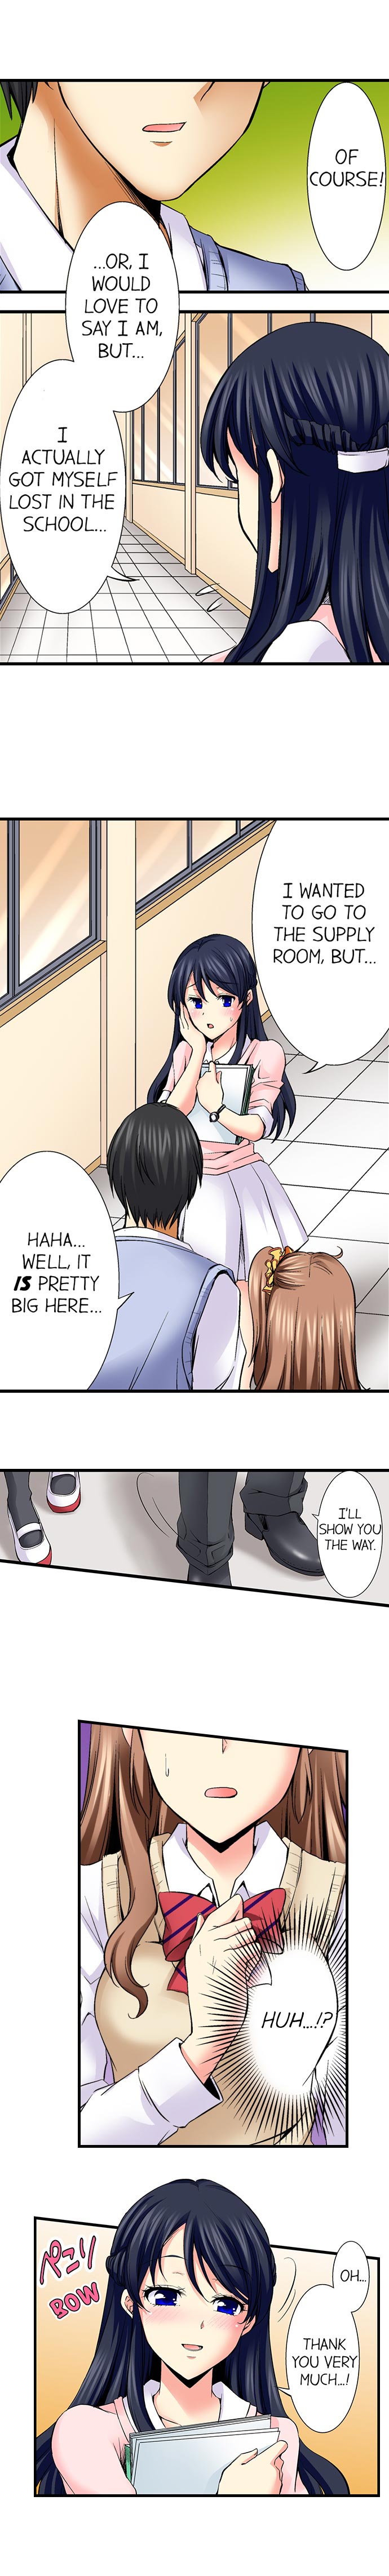 Why Can't i Have Sex With My Teacher? - Chapter 10 Page 5